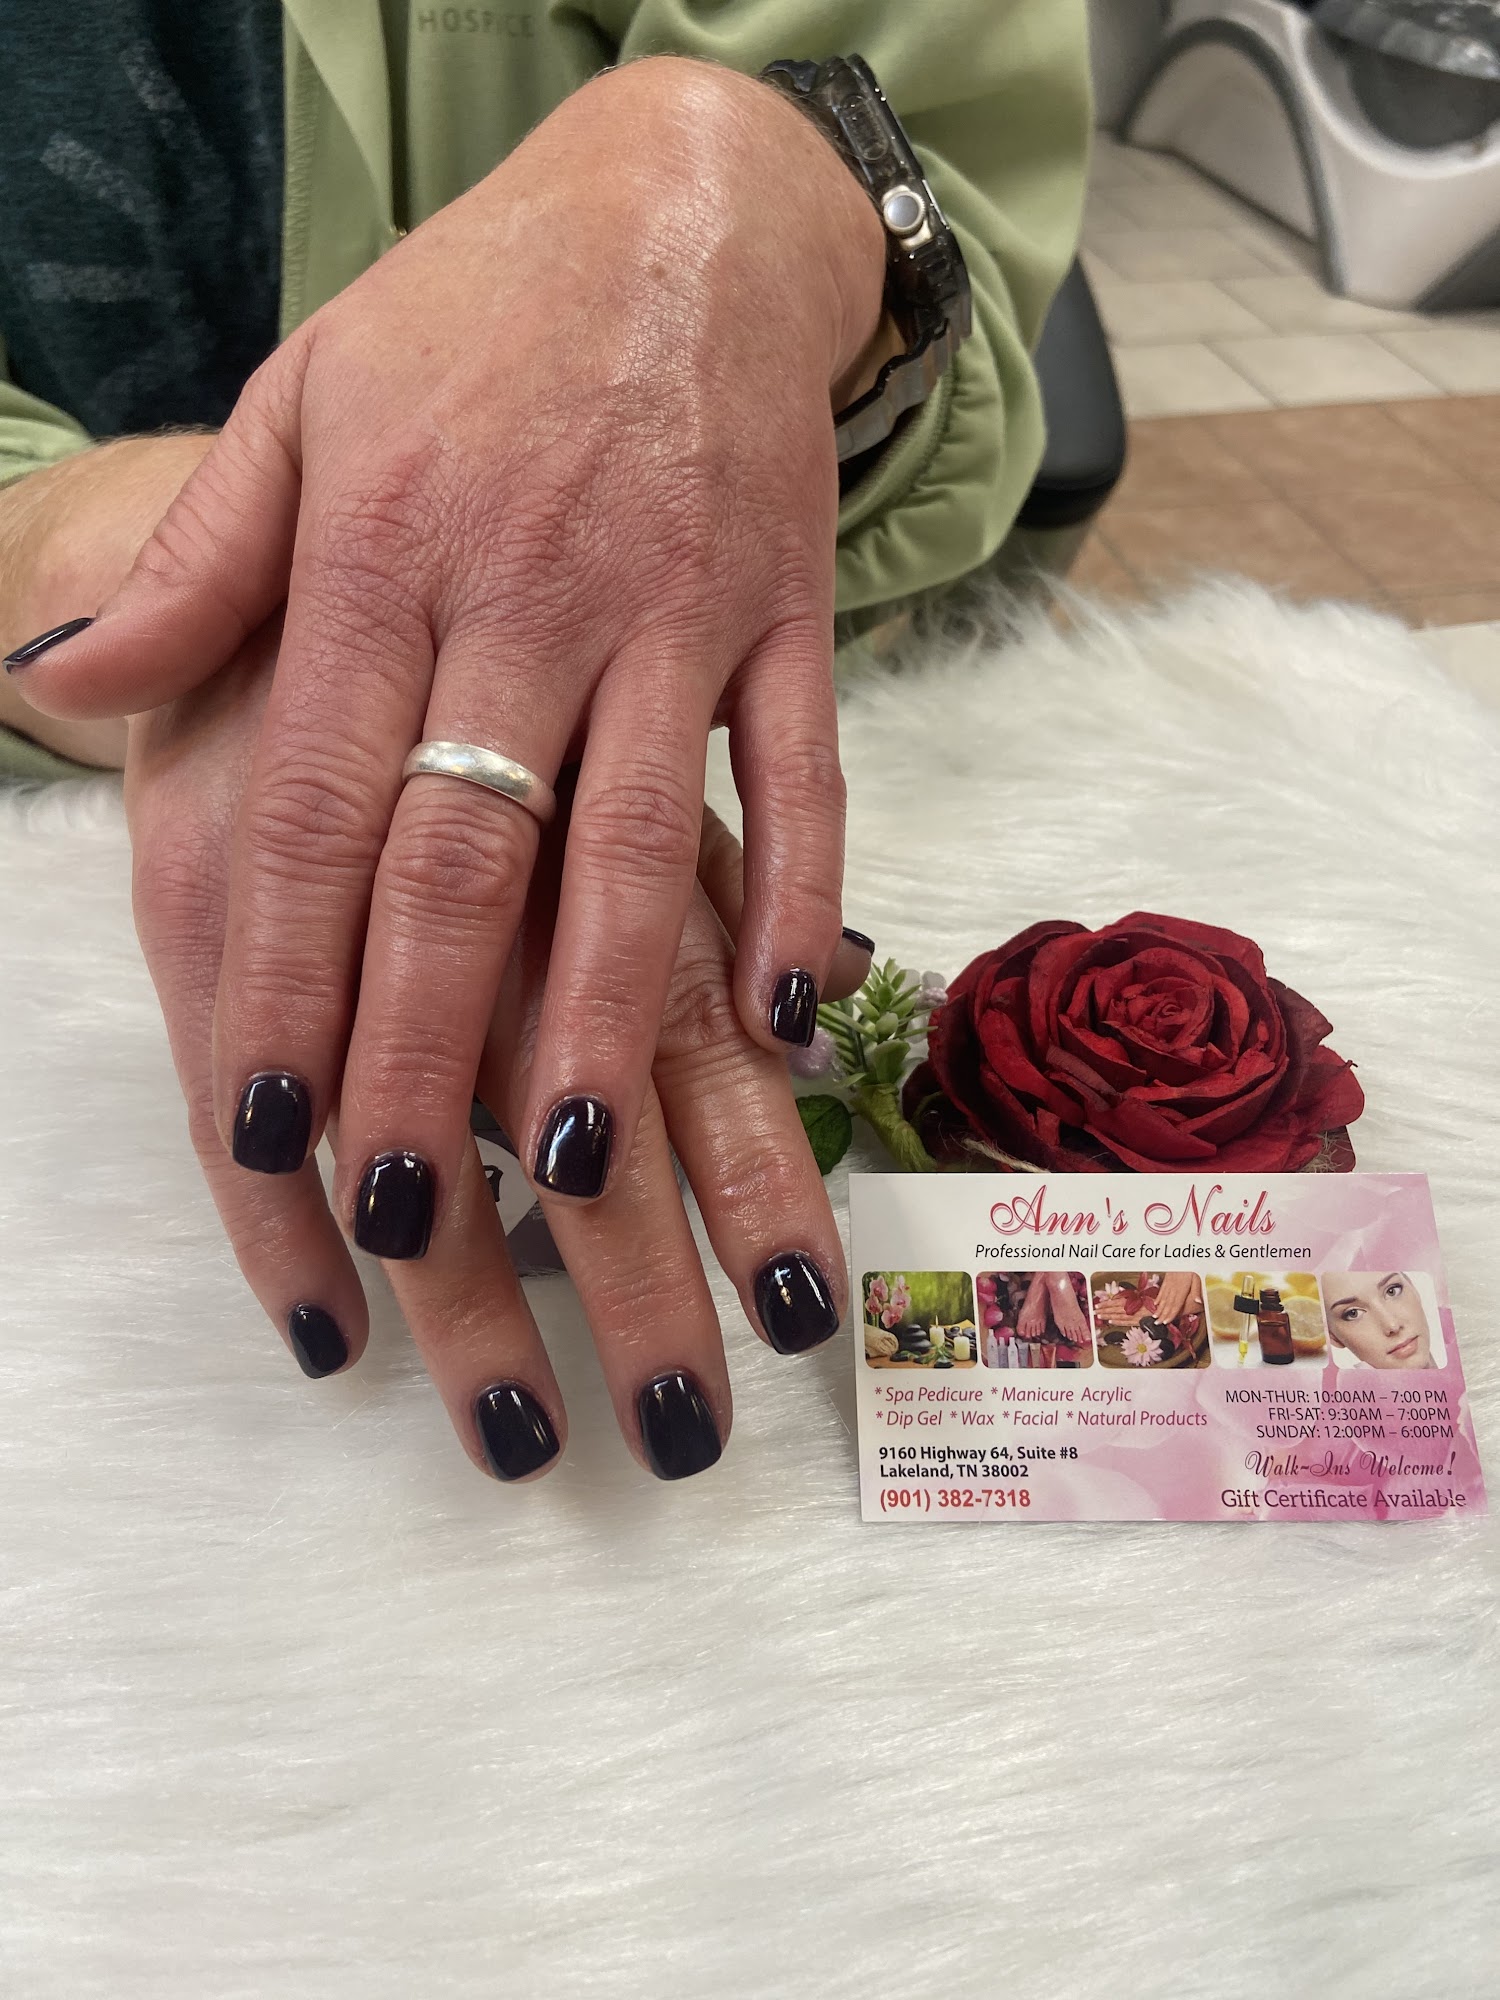 Ann's Nails 9160 US-64 Suite 8, Lakeland Tennessee 38002